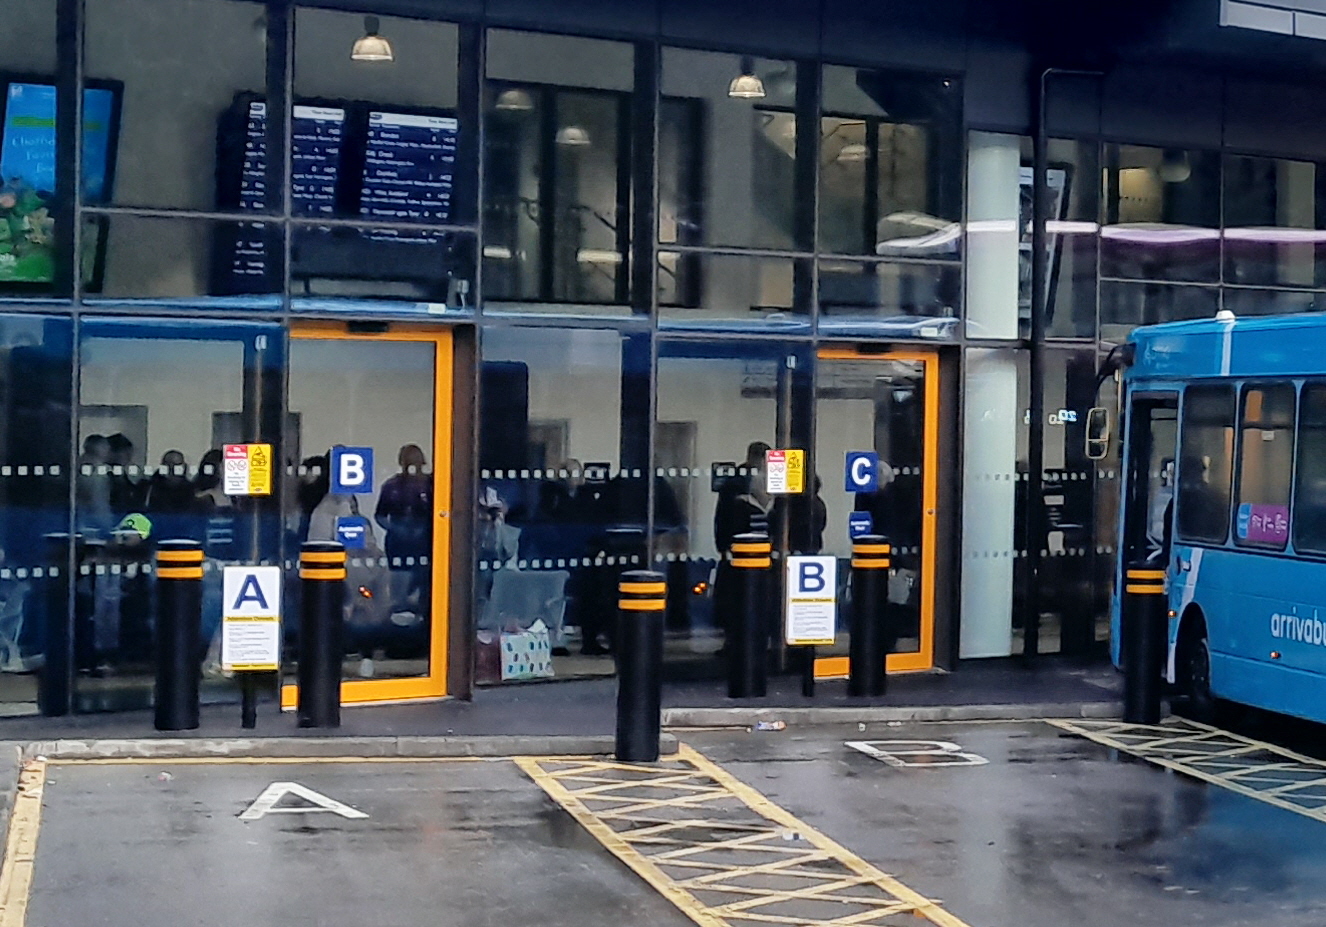 TORMAX Delivers Safe Access at New Durham Bus Station